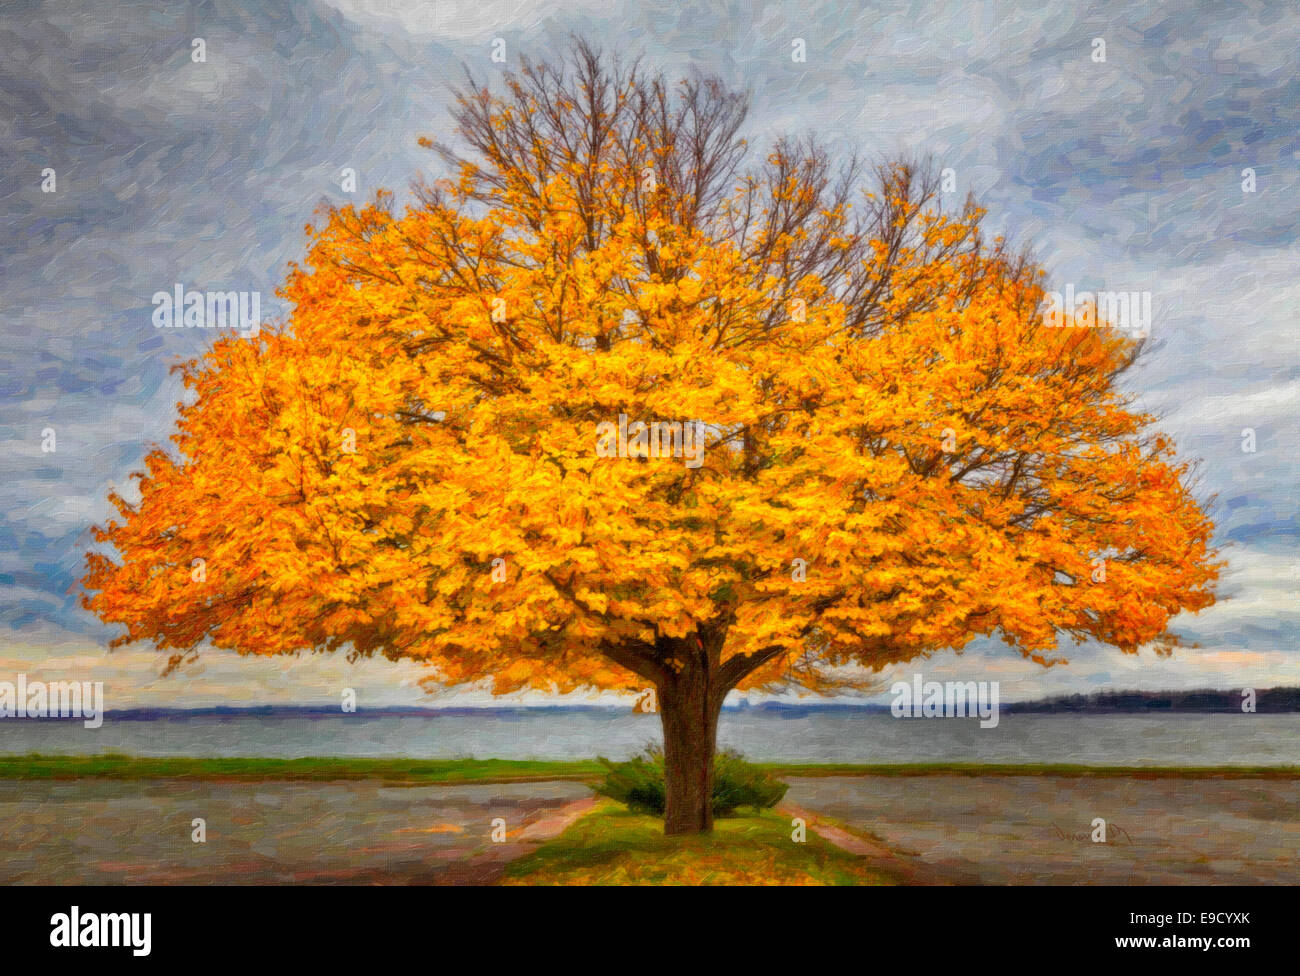 Beautiful linden tree in full fall coloration along a Prince Edward Island waterfront. Rendered as a digital oil painting. Stock Photo